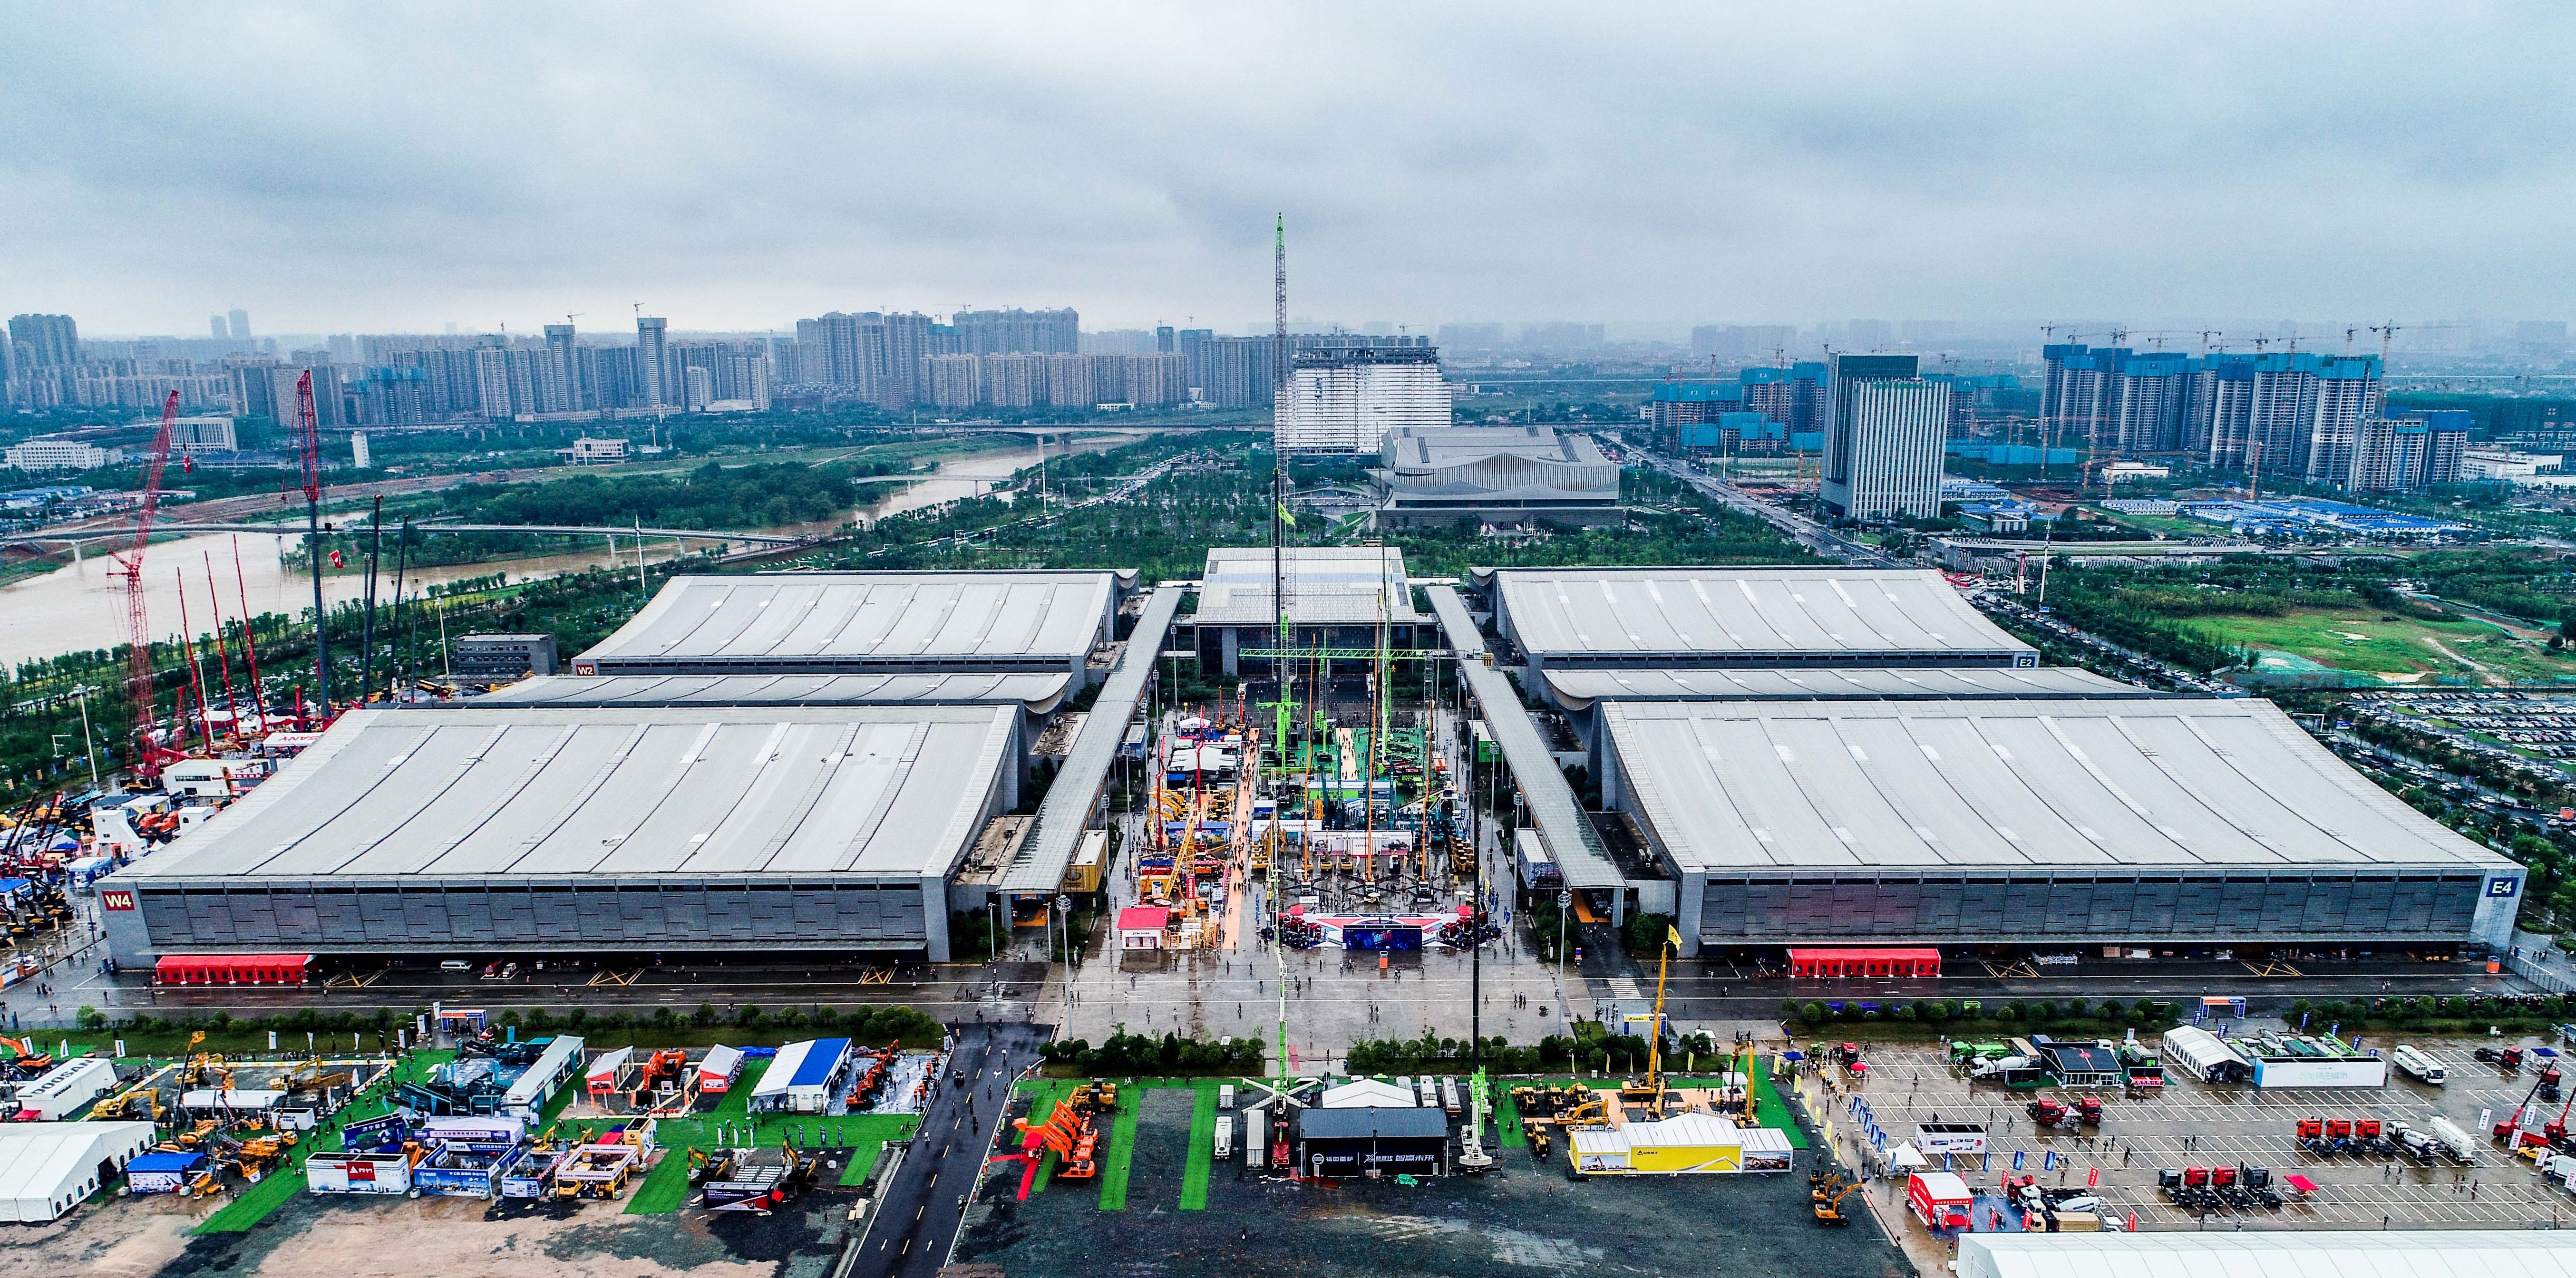 Panoramic view CICEE 2021 <br> Image source: Changsha International Construction Equipment Exhibition (CICEE)